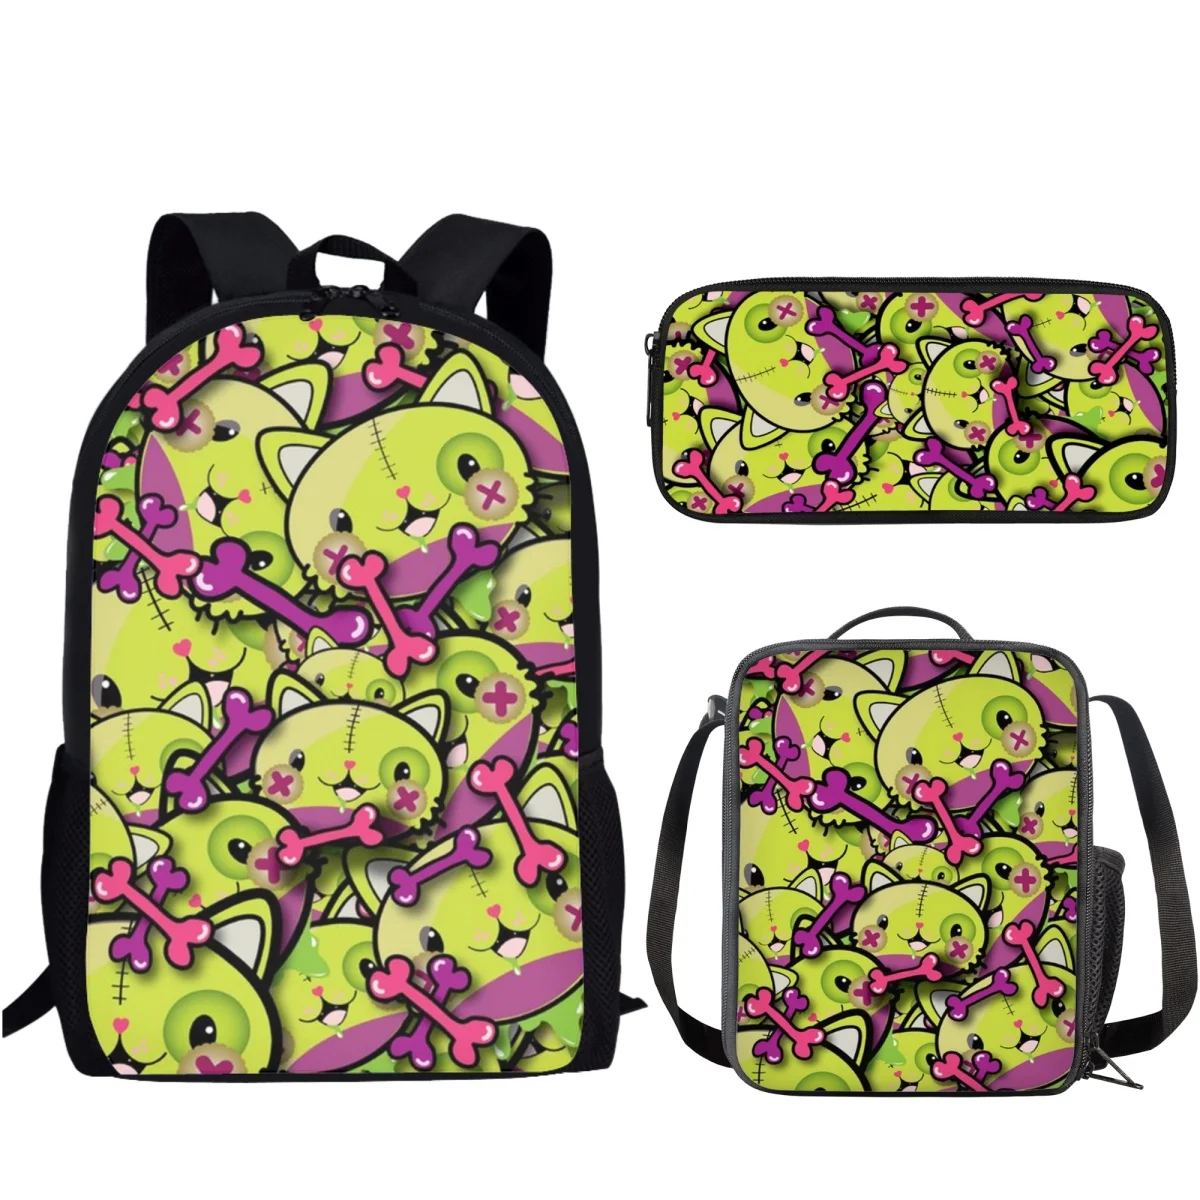 

BELIDOME Funny Cats Pattern Schoolbag With Pencil Case 3 Pieces Set for Teens Kids Boys Casual Backpack Women Lunch Box Mochilas